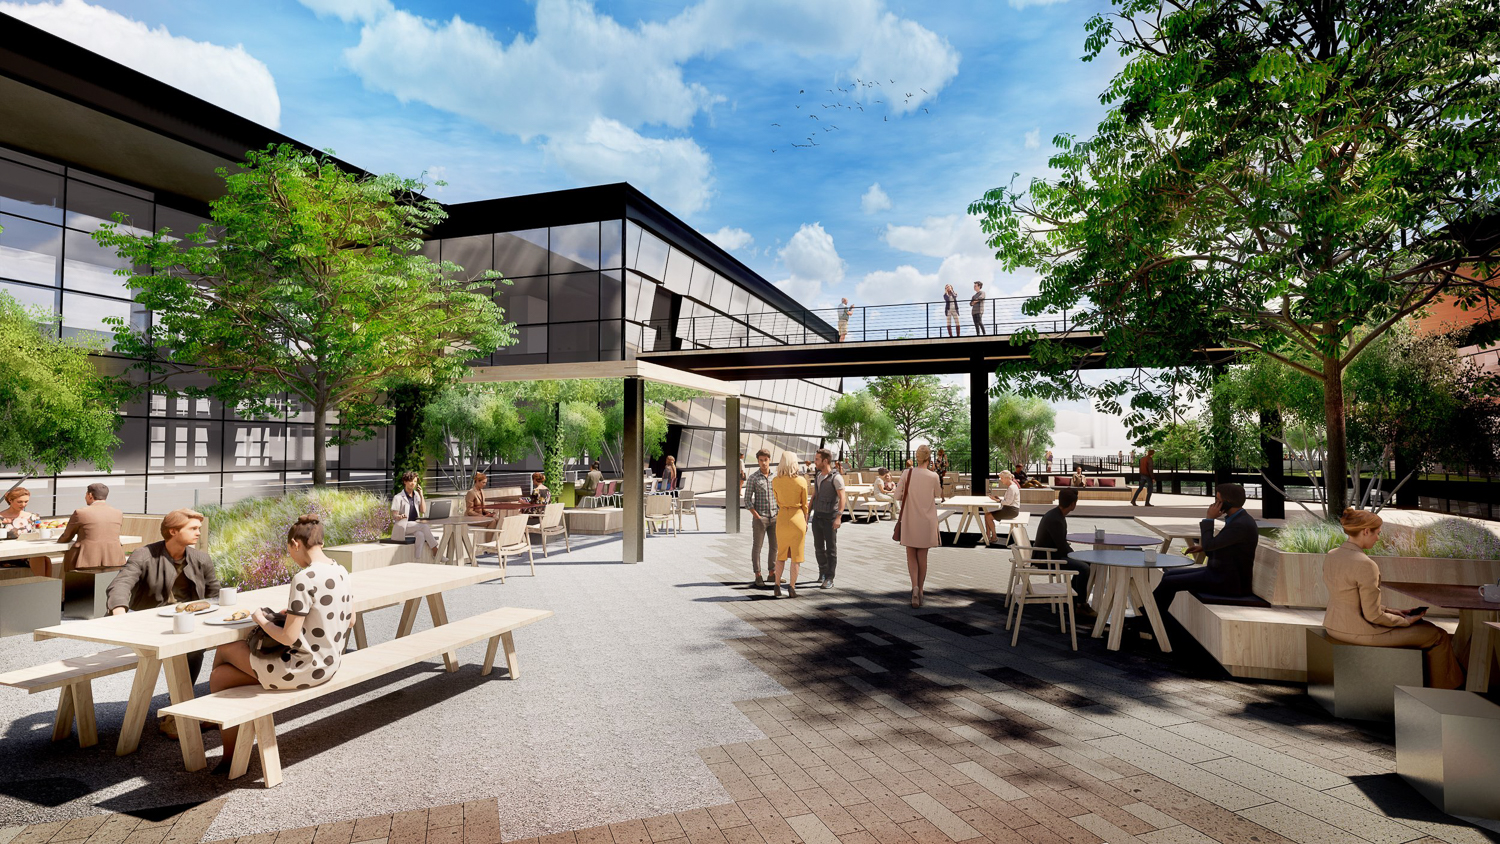 YouTube HQ on-site cafe, rendering by SHoP Architects and Surfacedesign